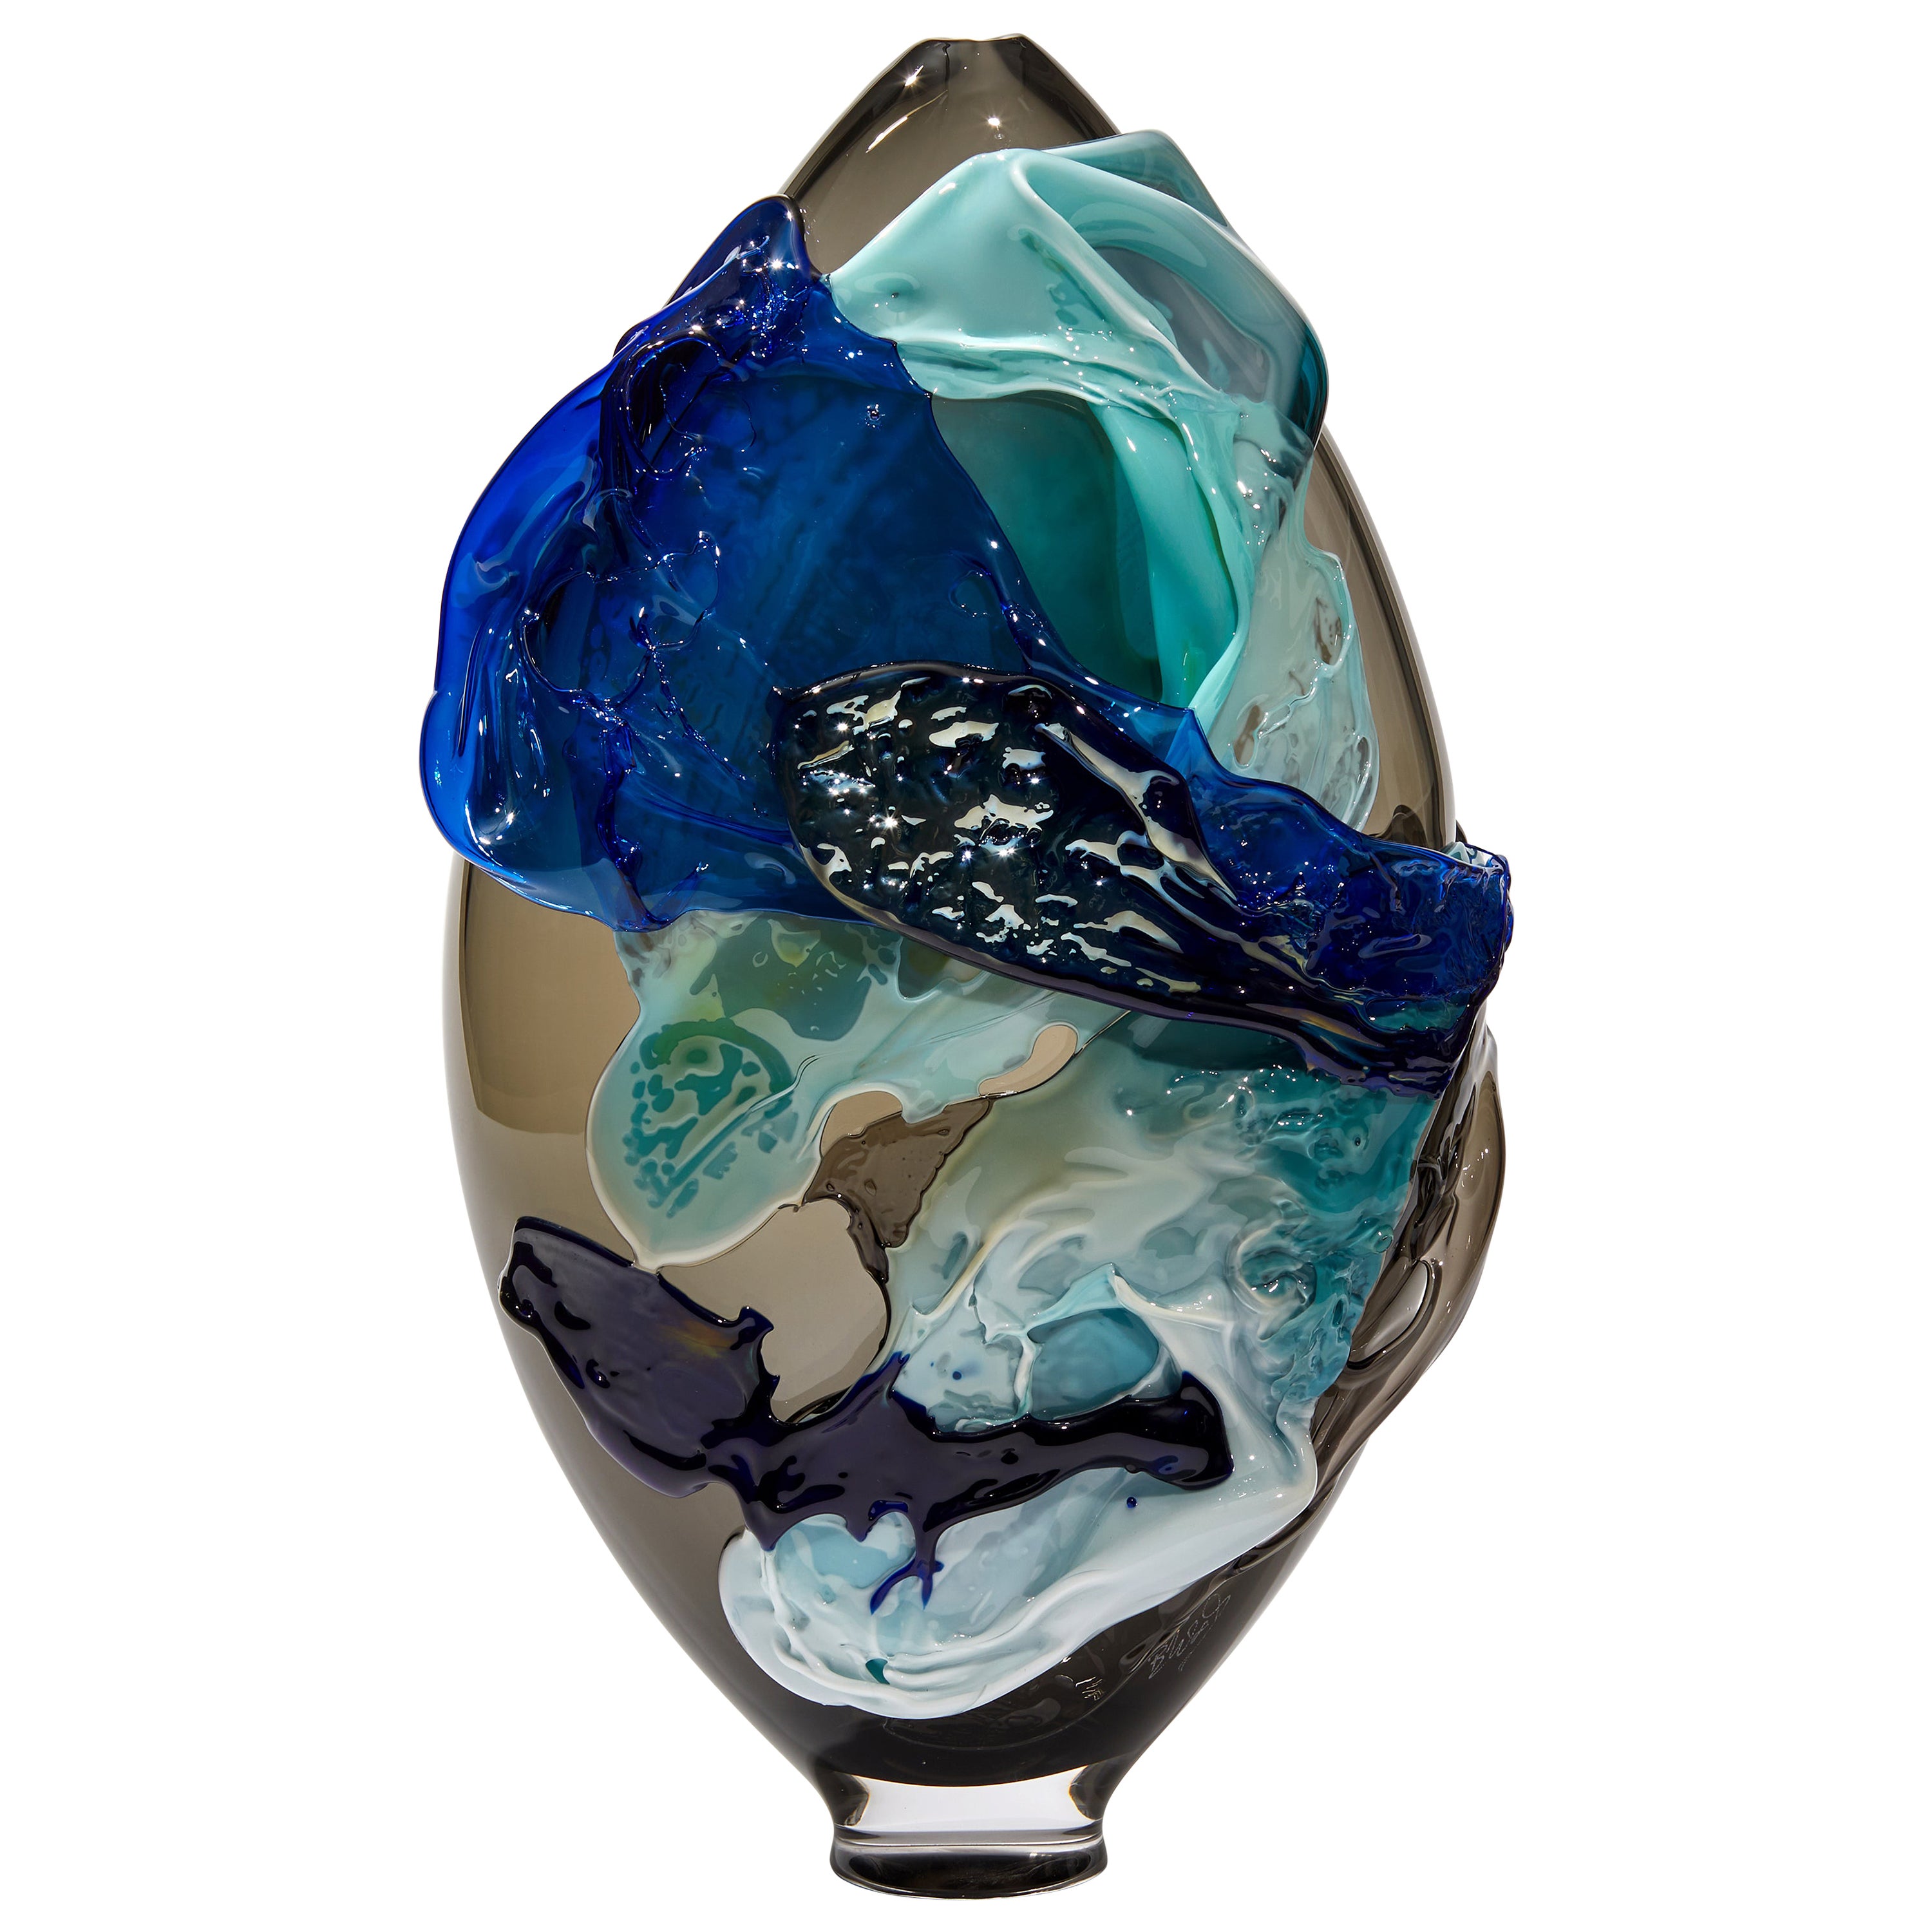 Torrent, a Unique Blue, Aqua, Black and Smoke Glass Vase by Bethany Wood